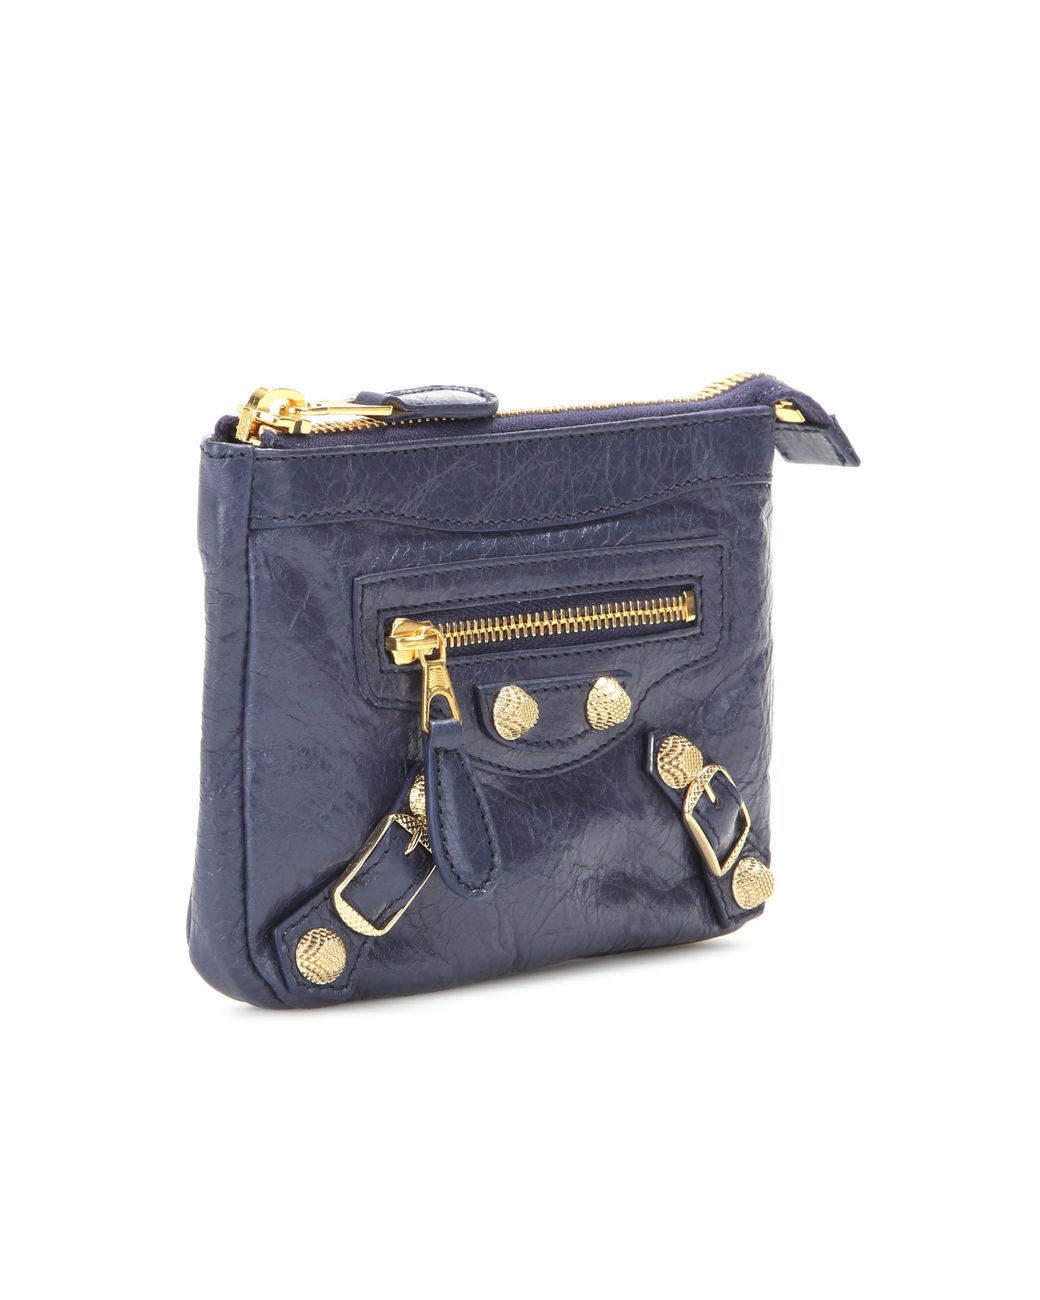 Fjern Nysgerrighed Bagvaskelse Balenciaga Giant Leather Coin Purse in Blue | Lyst